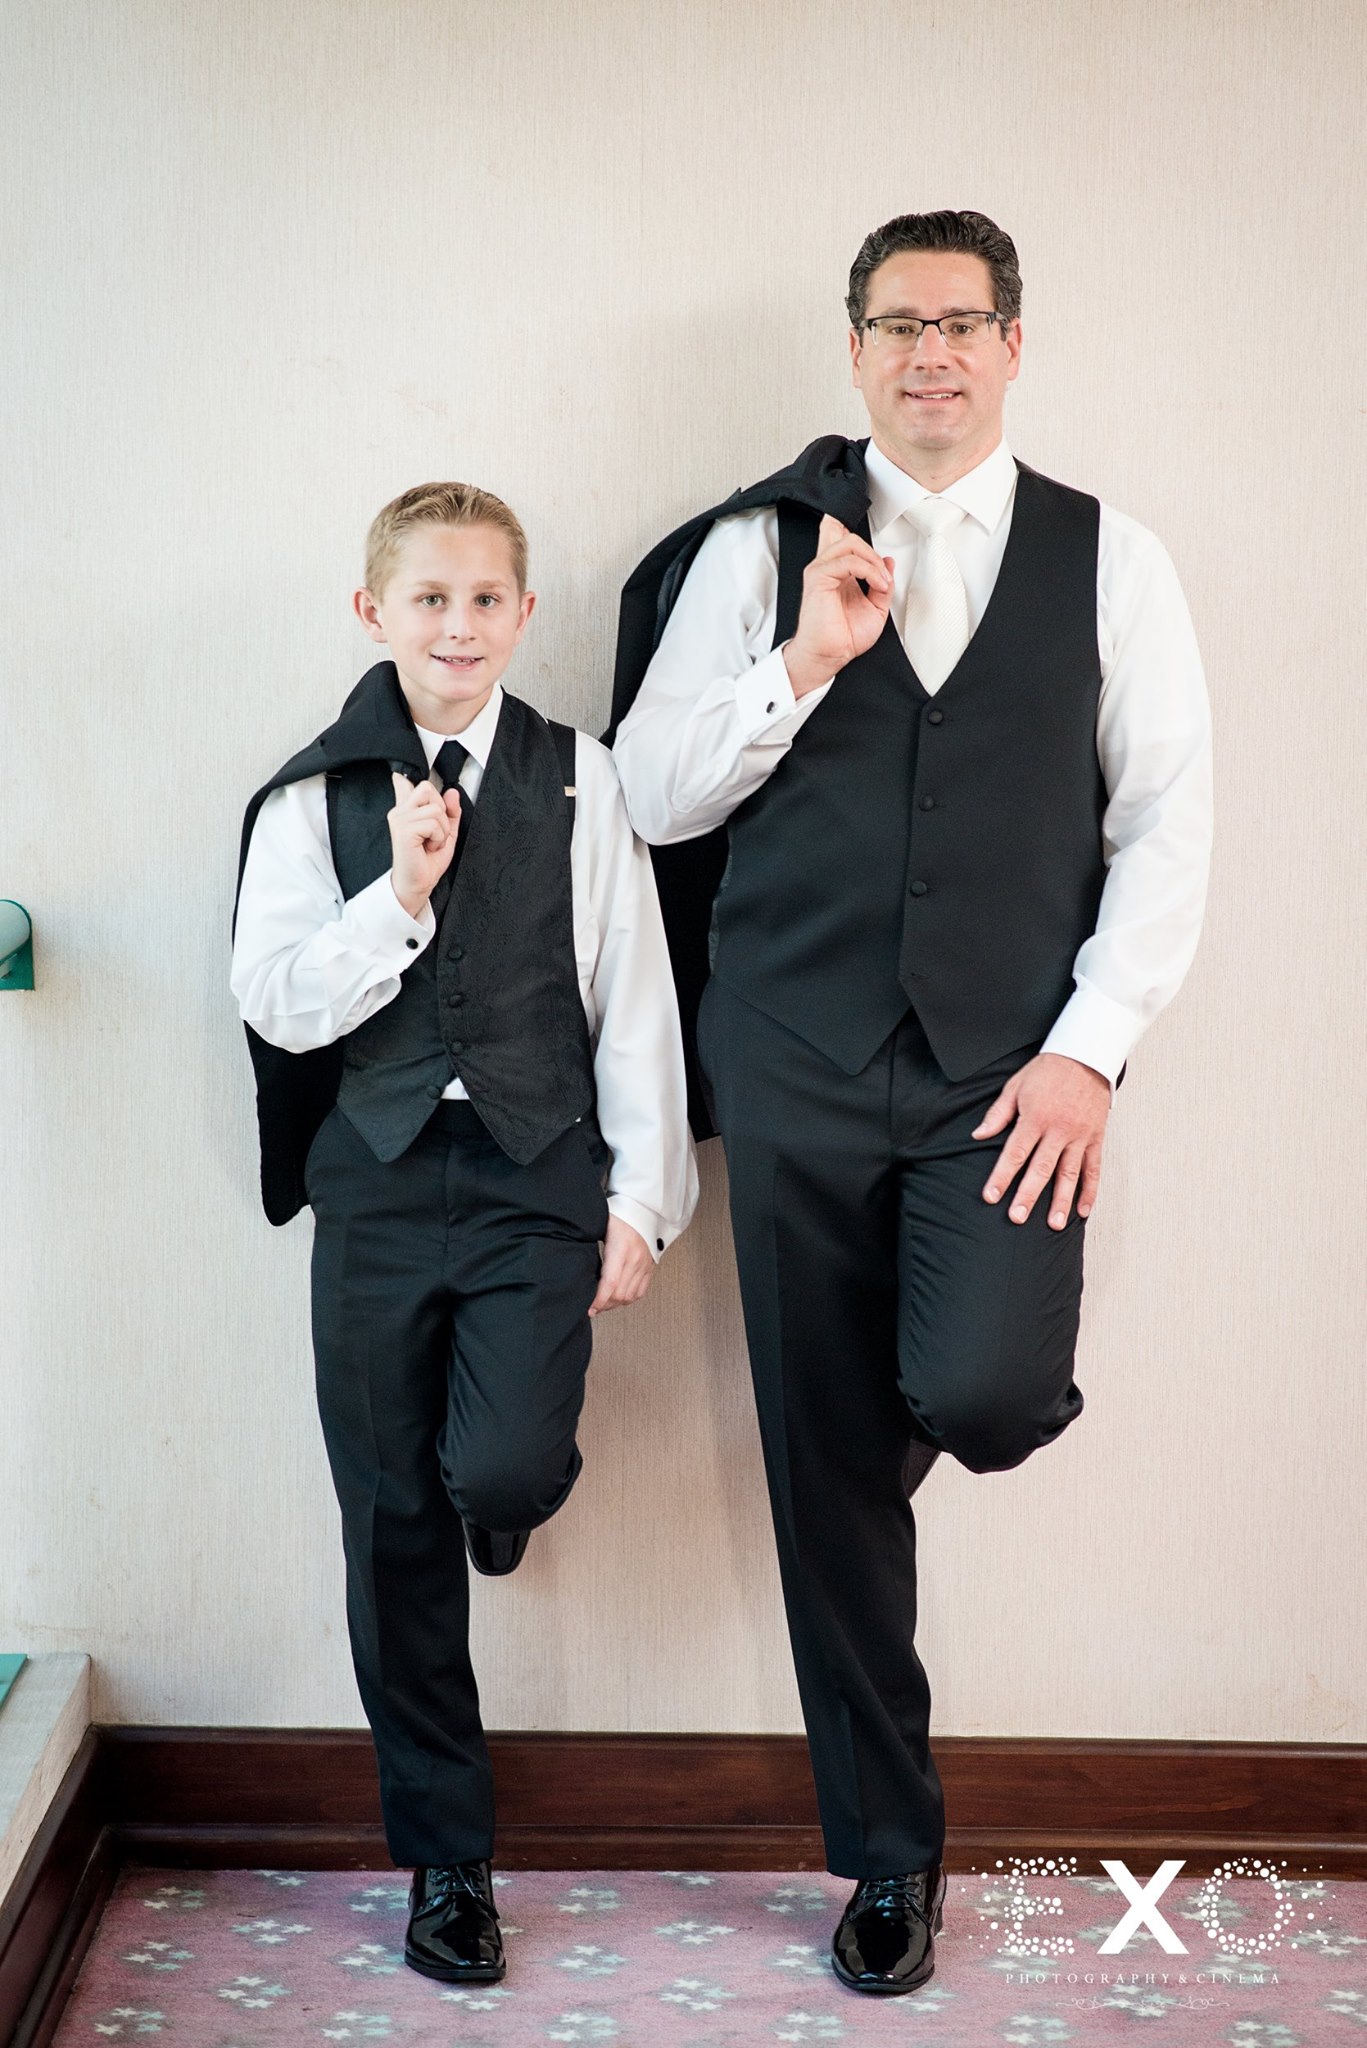 groom and young boy posed near a wall